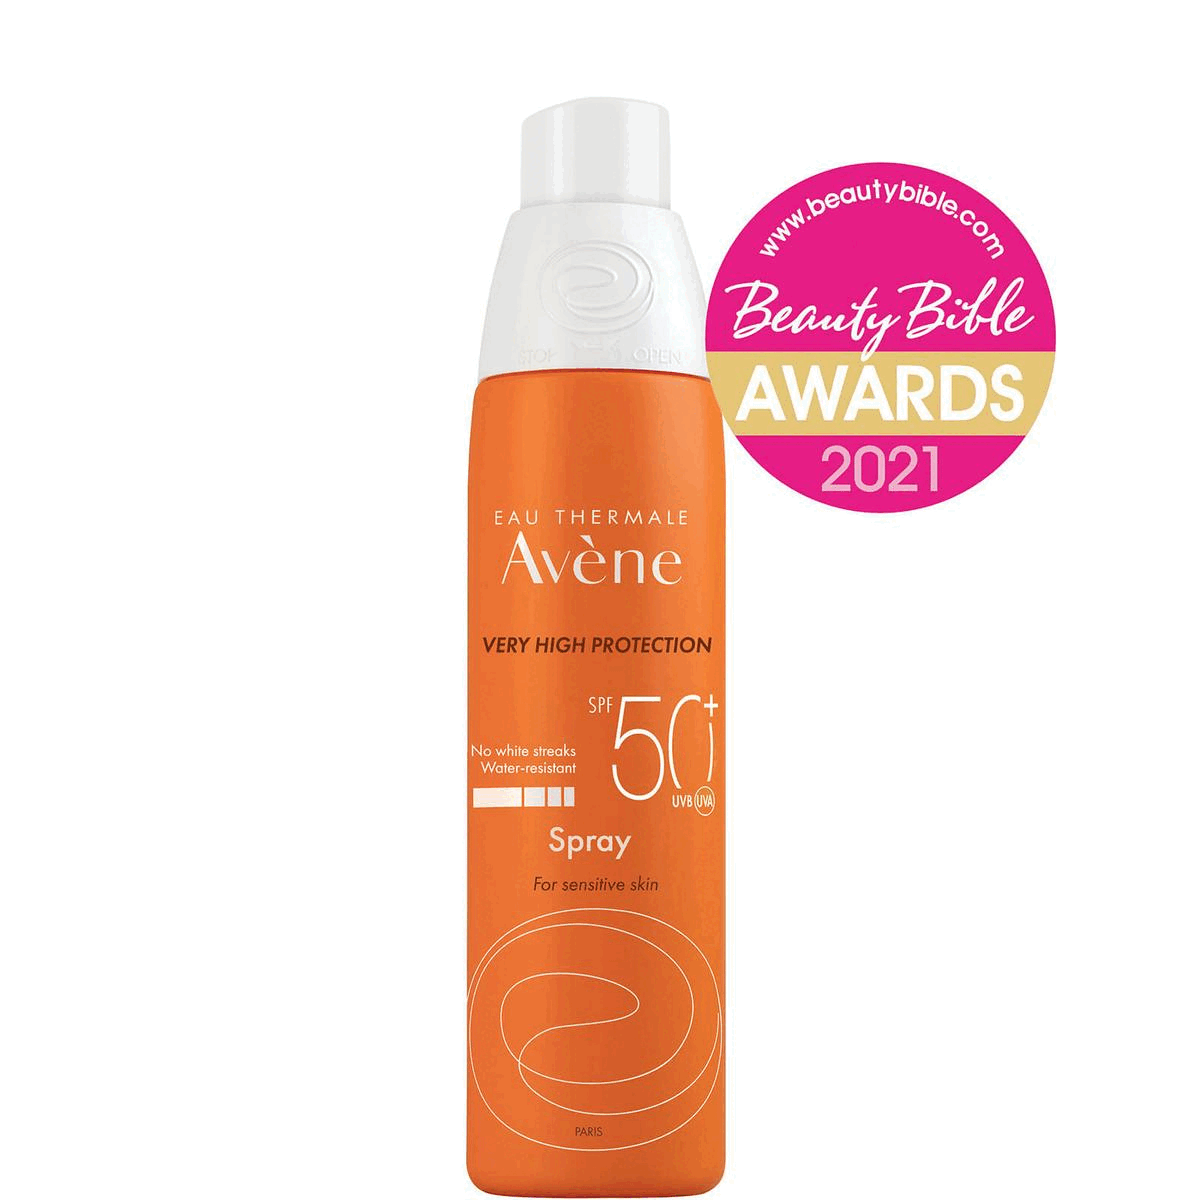 Beauty Bible award 2021.Beauty Bible award 2021, sensitive skin, face and body. 6 hours of hydration. Skin protect ocean respect. The perfect routine. Tested on sensitive skin, recommended by dermatologists.